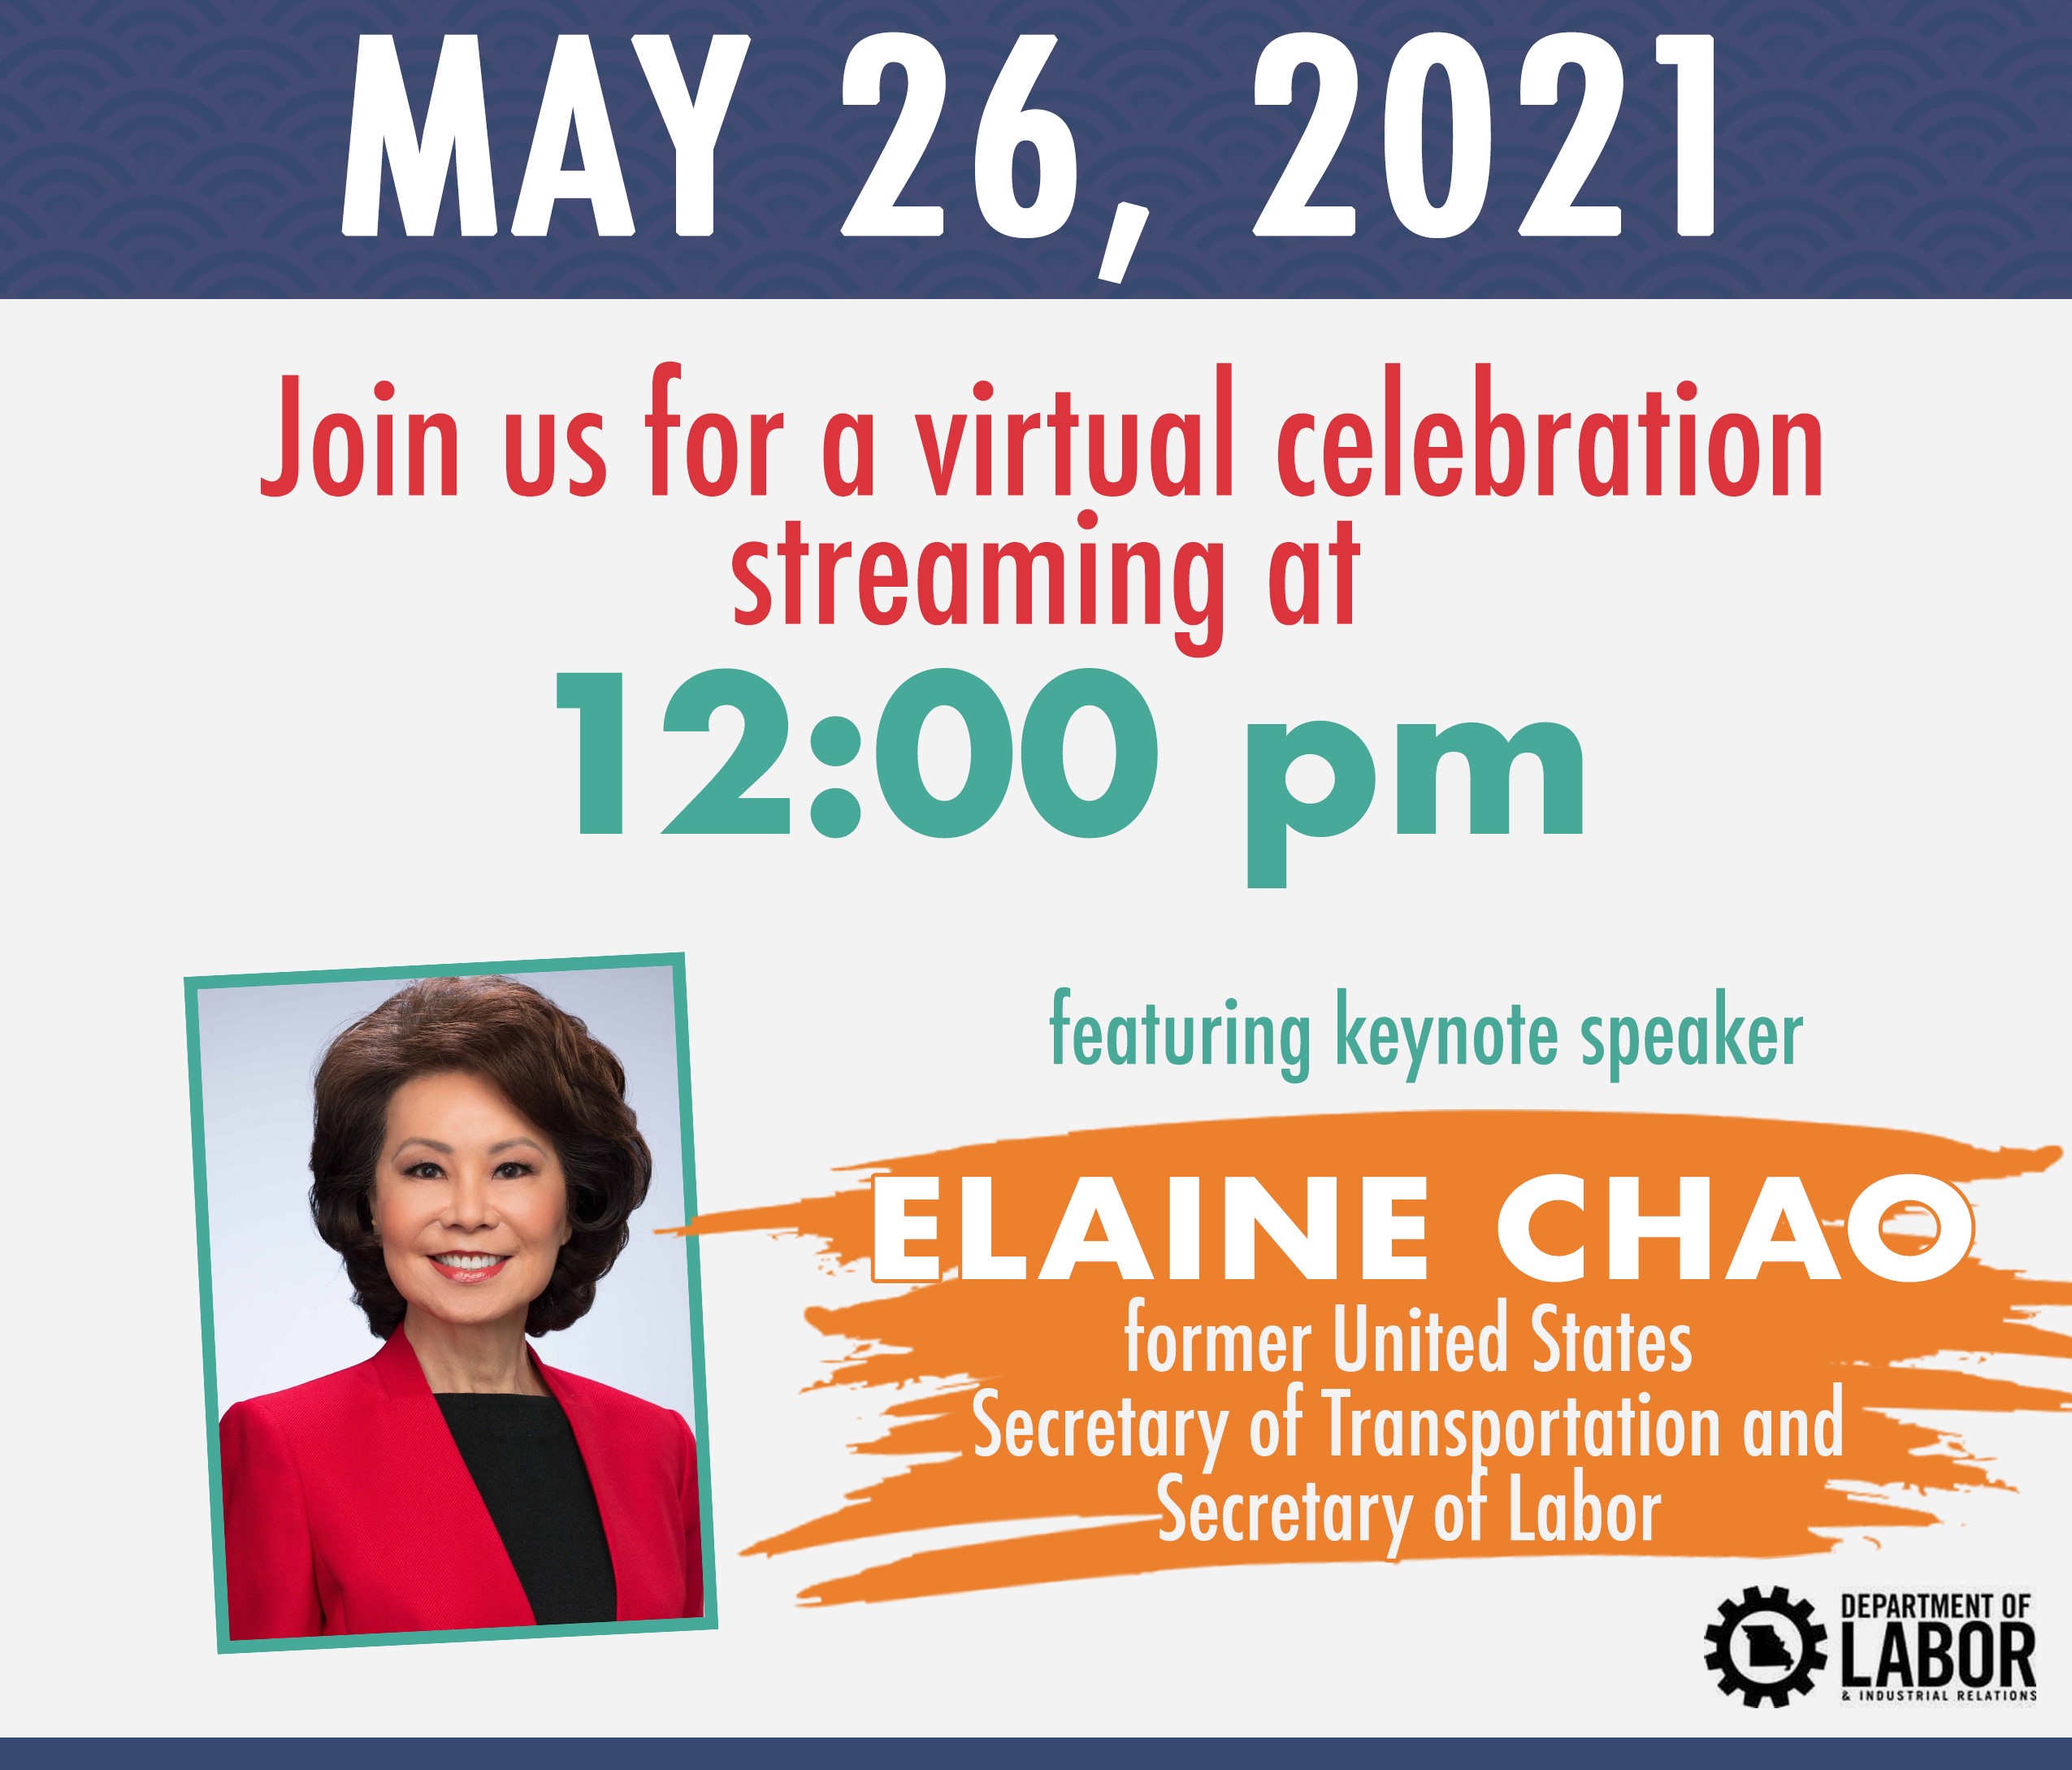 Join us May 26, 2021 at 12:00 pm on vimeo for a virtual celebration of Asian-Pacific American Heritage Month